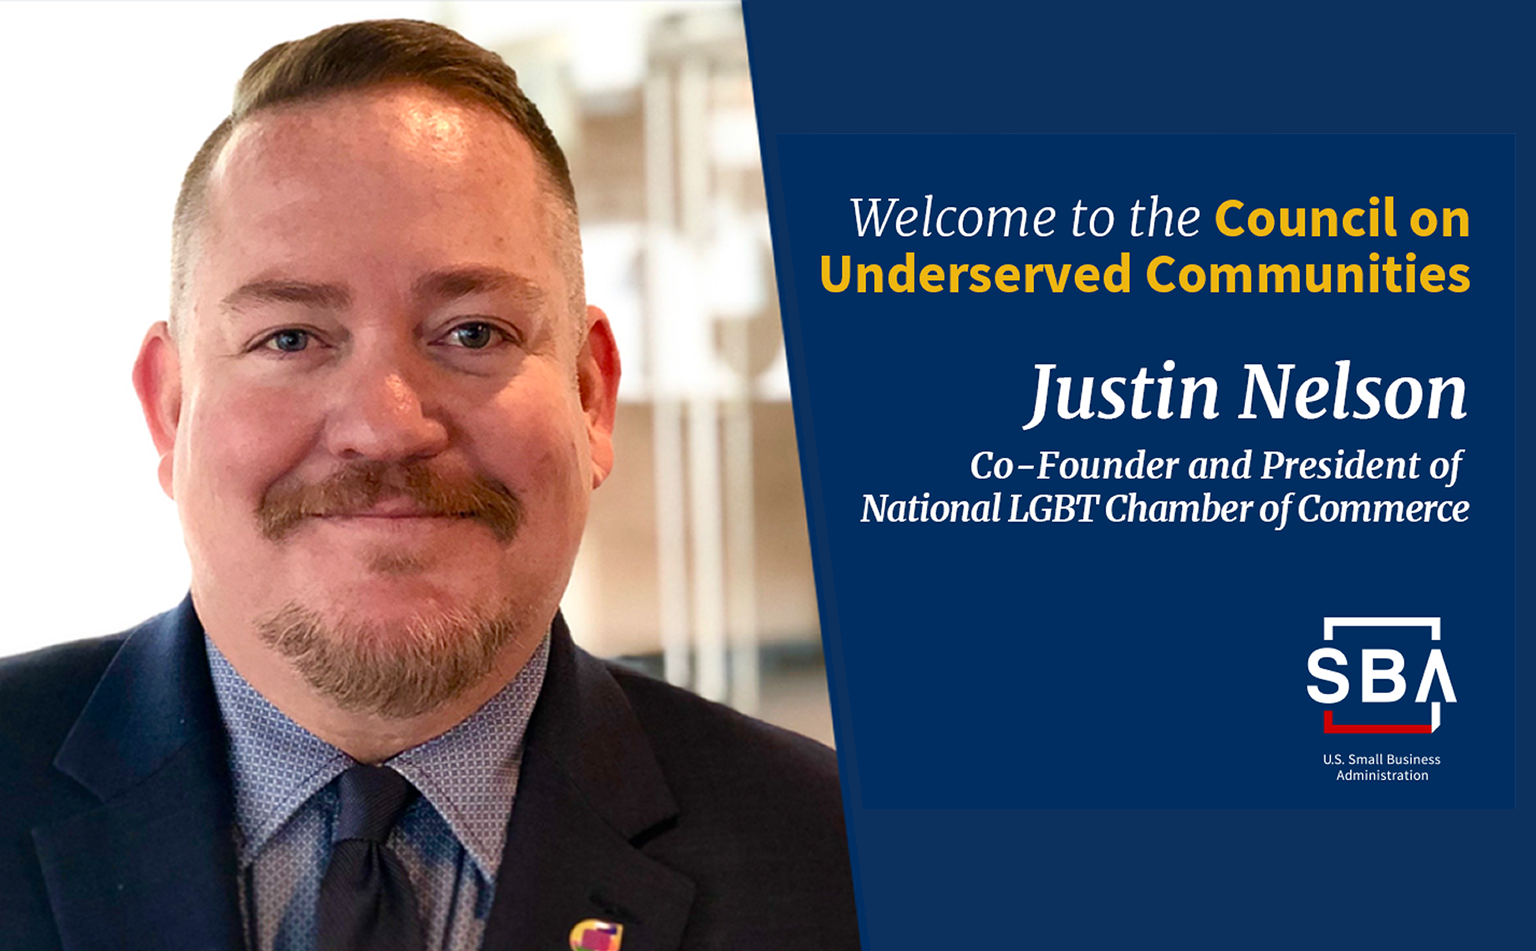 You are currently viewing Justin Nelson is the new Council on Underserved Communities at the SBA